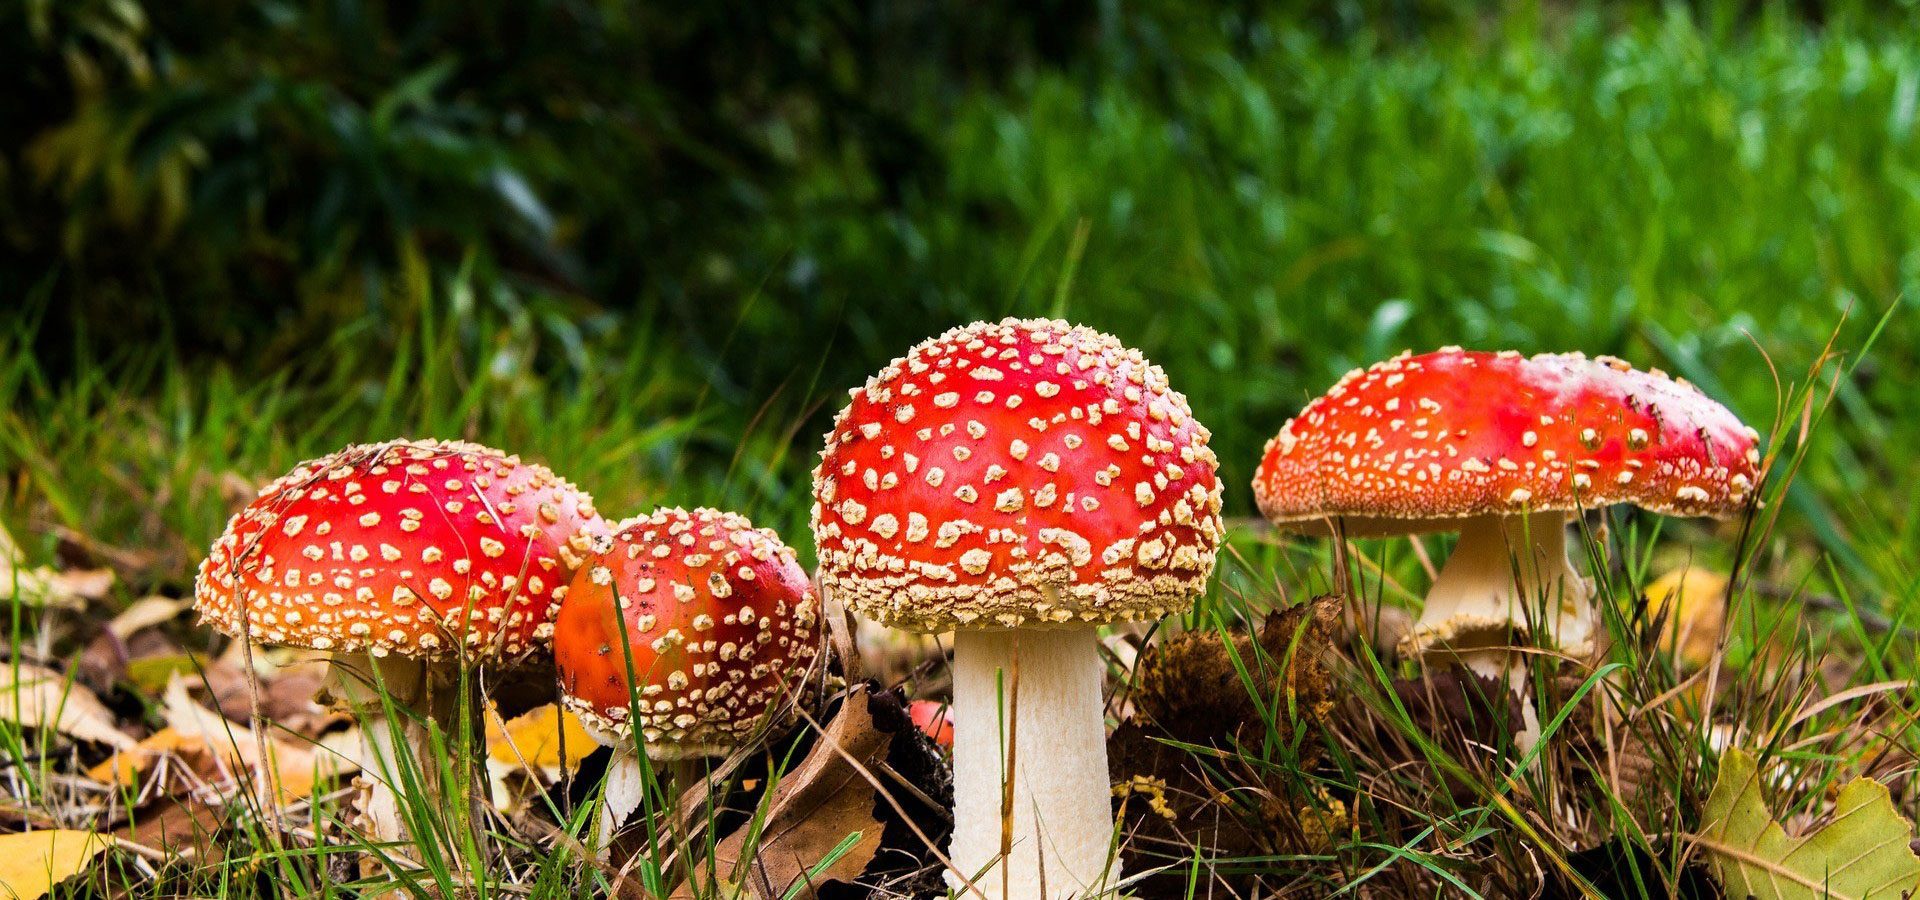 Fly agaric | Buy amanita muscaria | dried mushrooms top quality ES